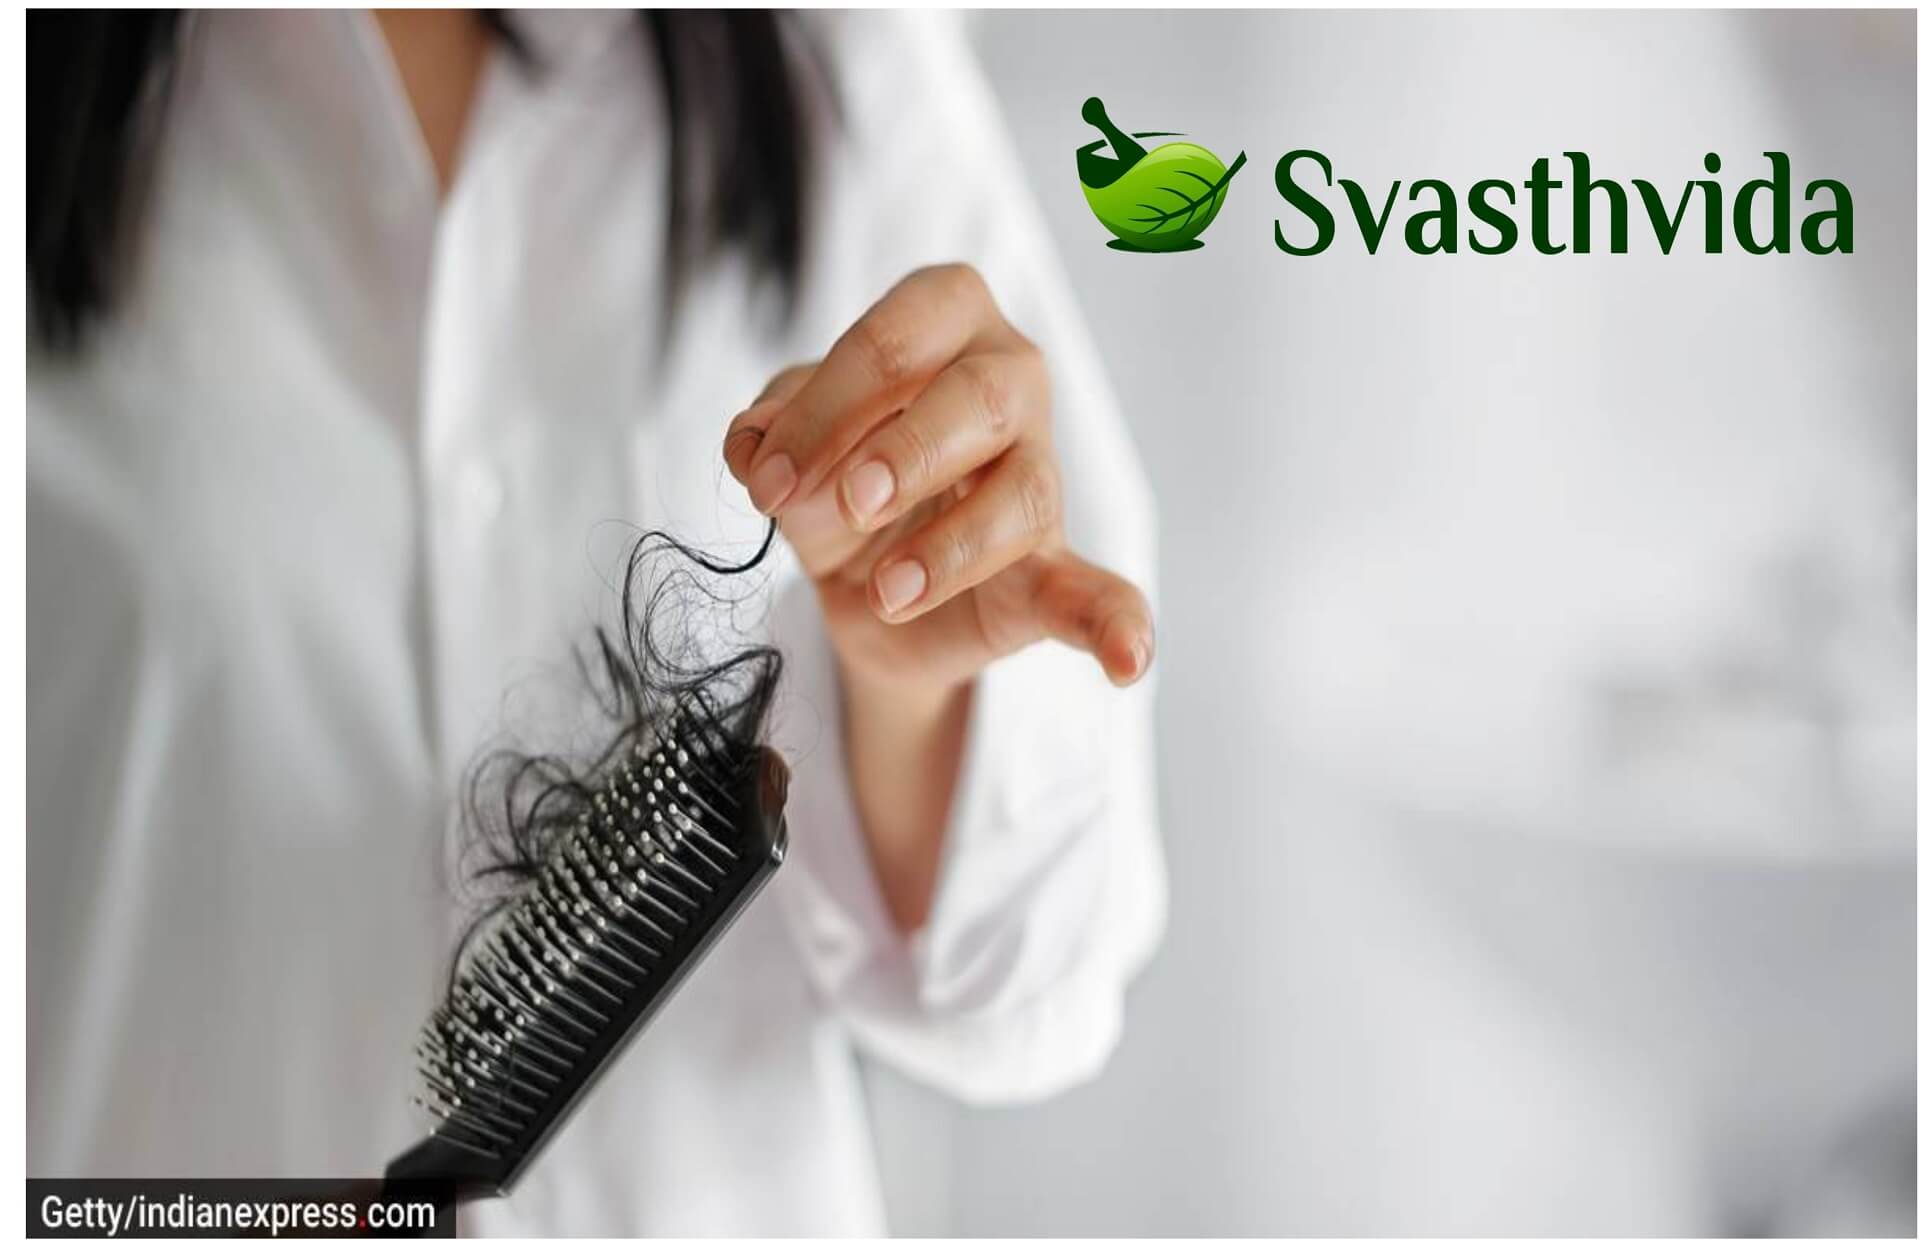 Ayurvedic Treatment For Hair Problems In Bhatpara